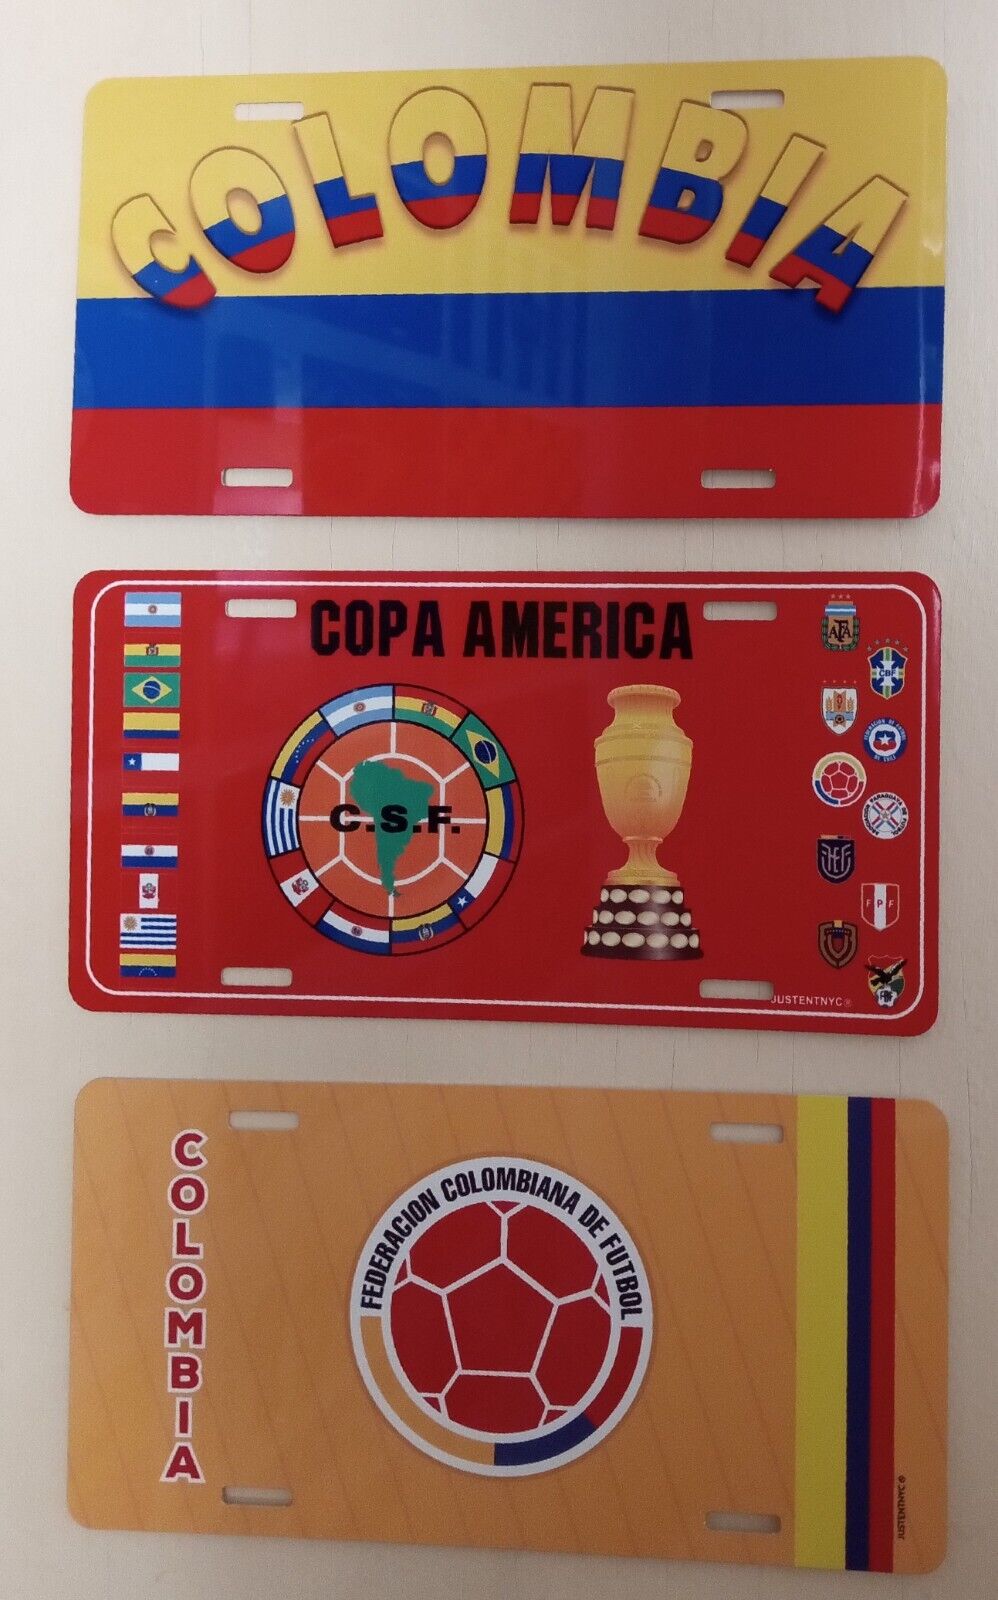 3 COLOMBIA GIFTS: 3 ASSORTED ALUMINUM LICENSE PLATES  MADE IN USA $45